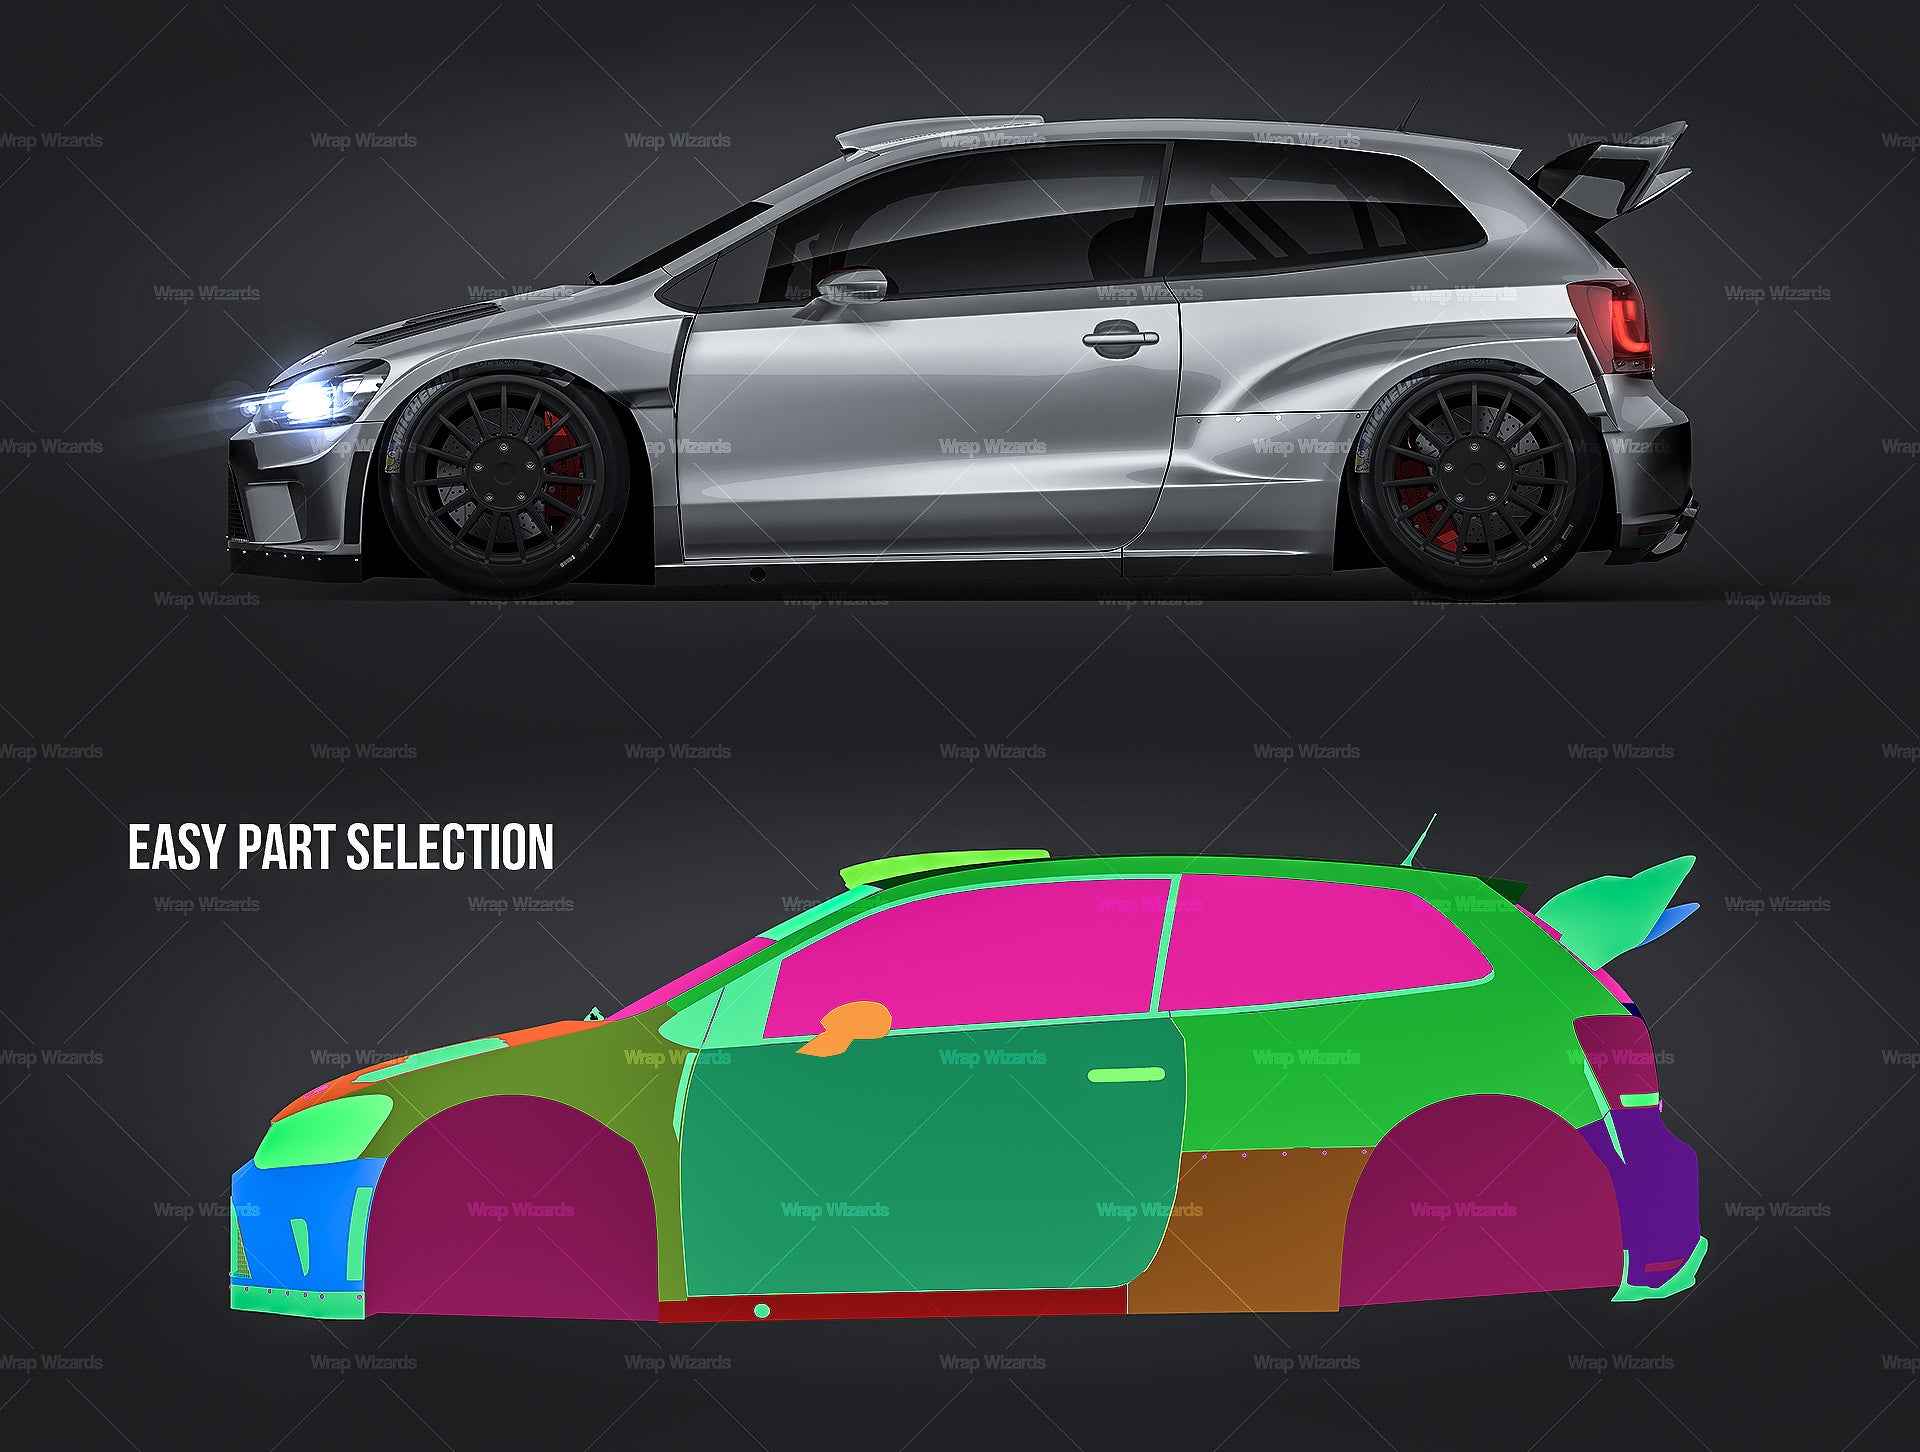 Volkswagen Polo R WRC 2018 glossy finish - all sides Car Mockup Template.psd